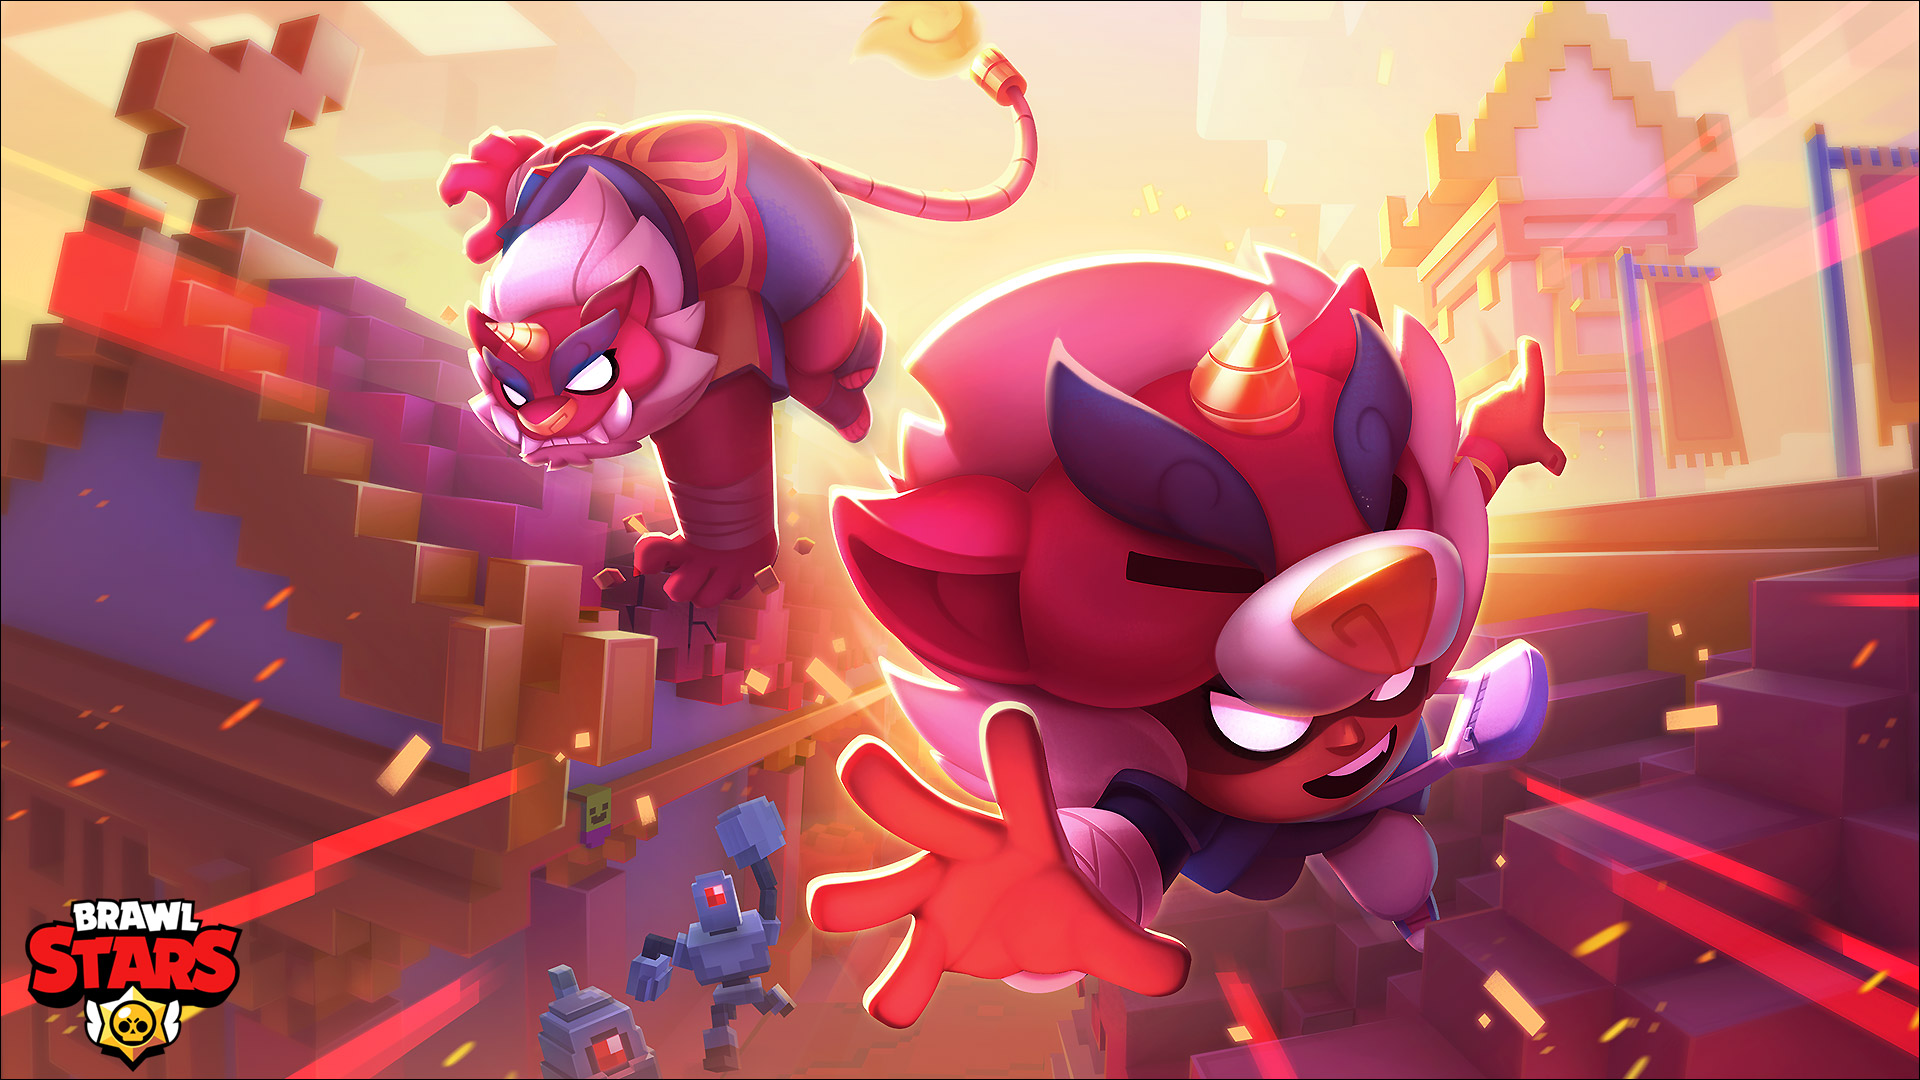 Go inside the design of Supercell's new hit game Brawl Stars at GDC 2019!, News, GDC